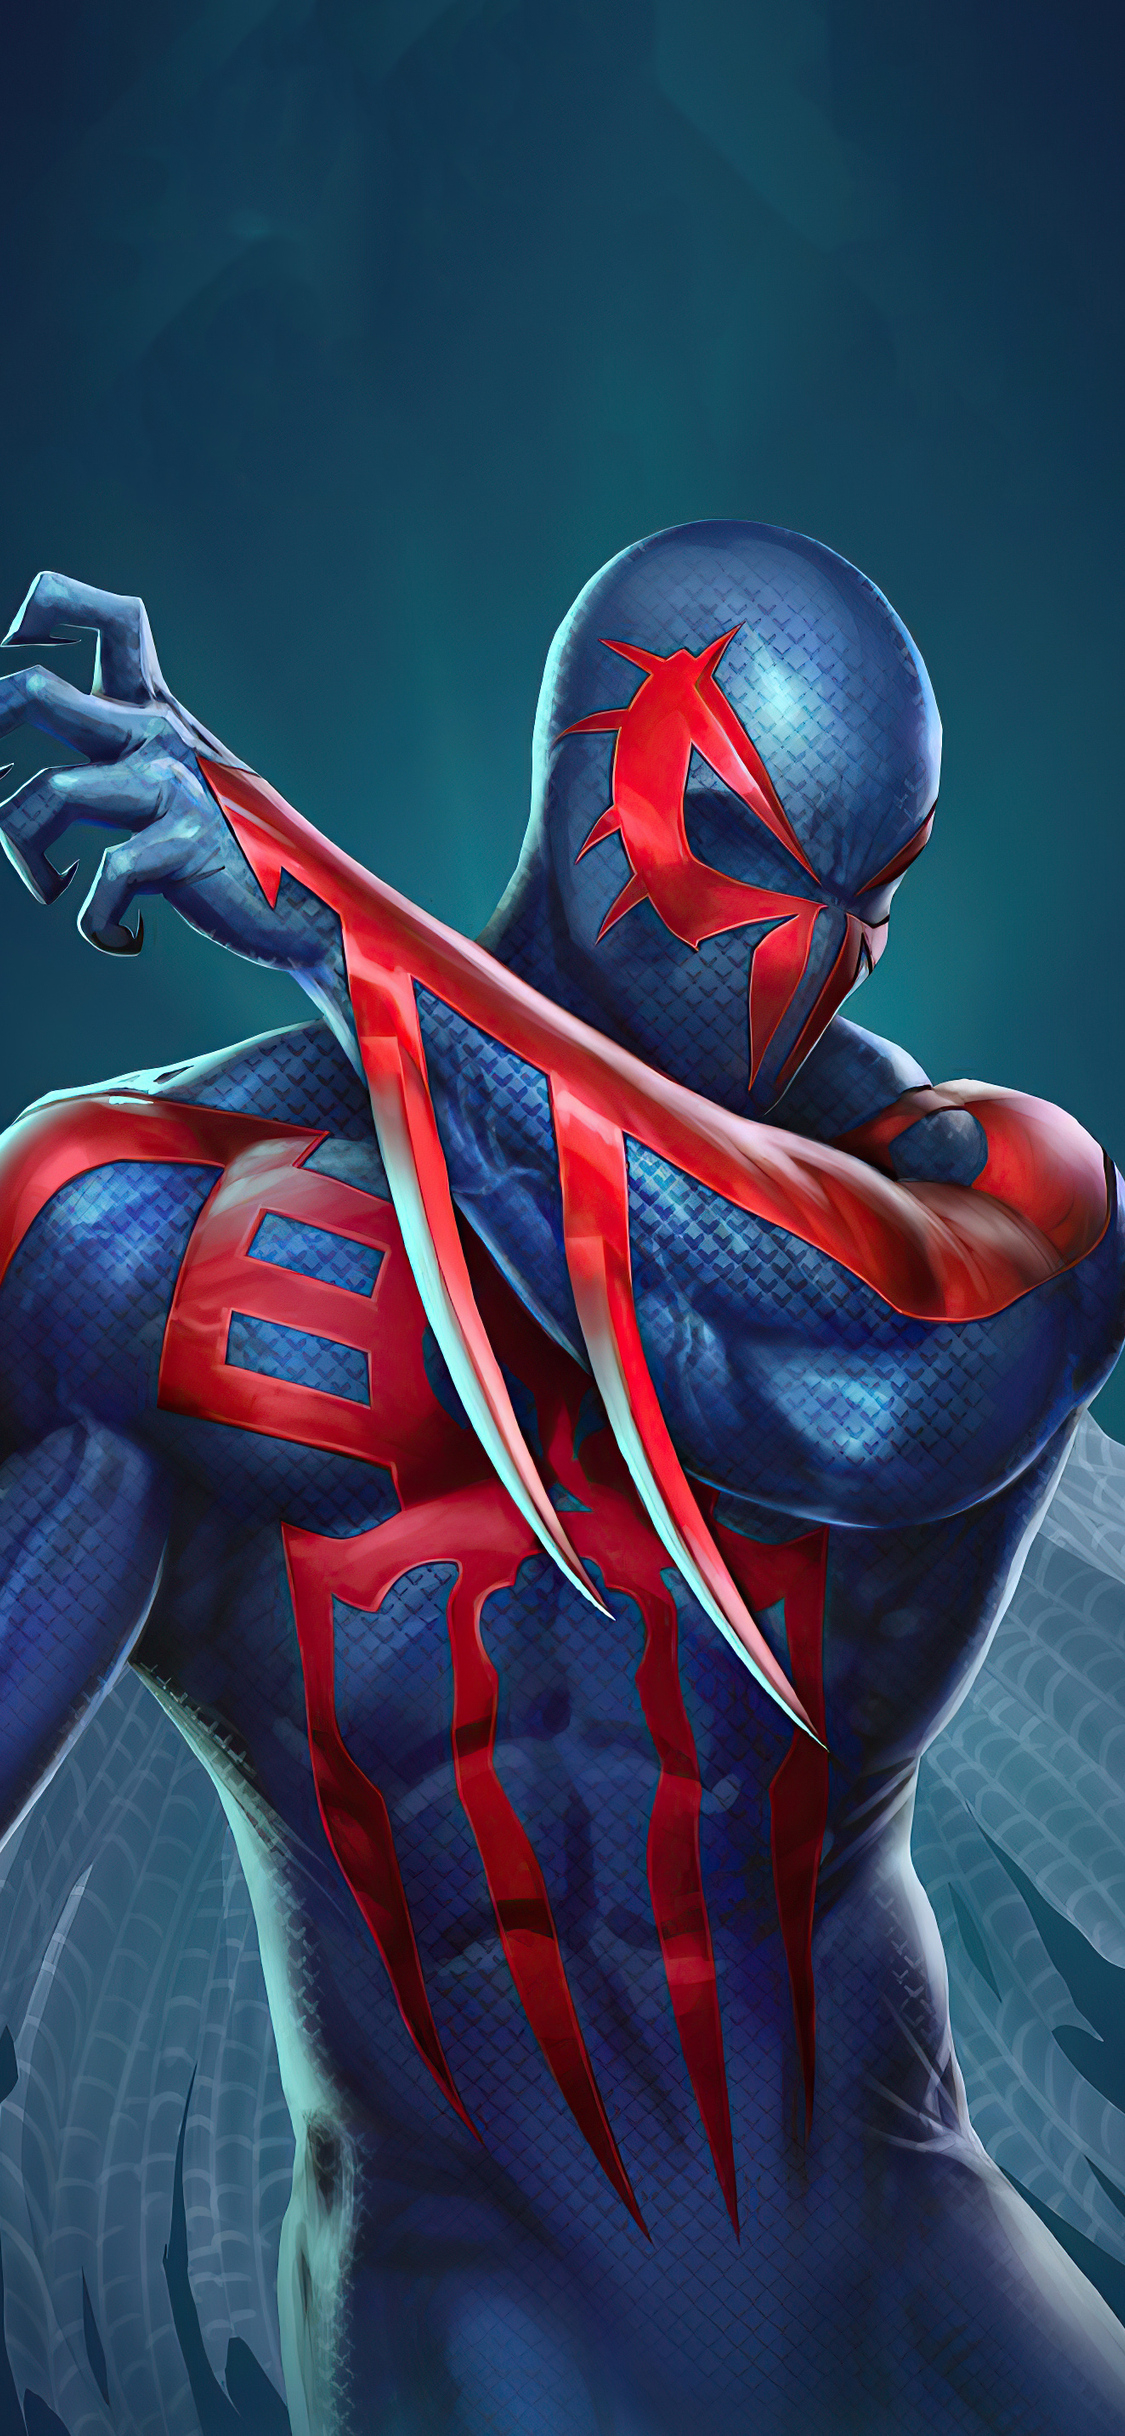 1125x2436 Spider Man 2099 Art Iphone XS,Iphone 10,Iphone X HD 4k Wallpapers, Images, Backgrounds, Photos and Pictures